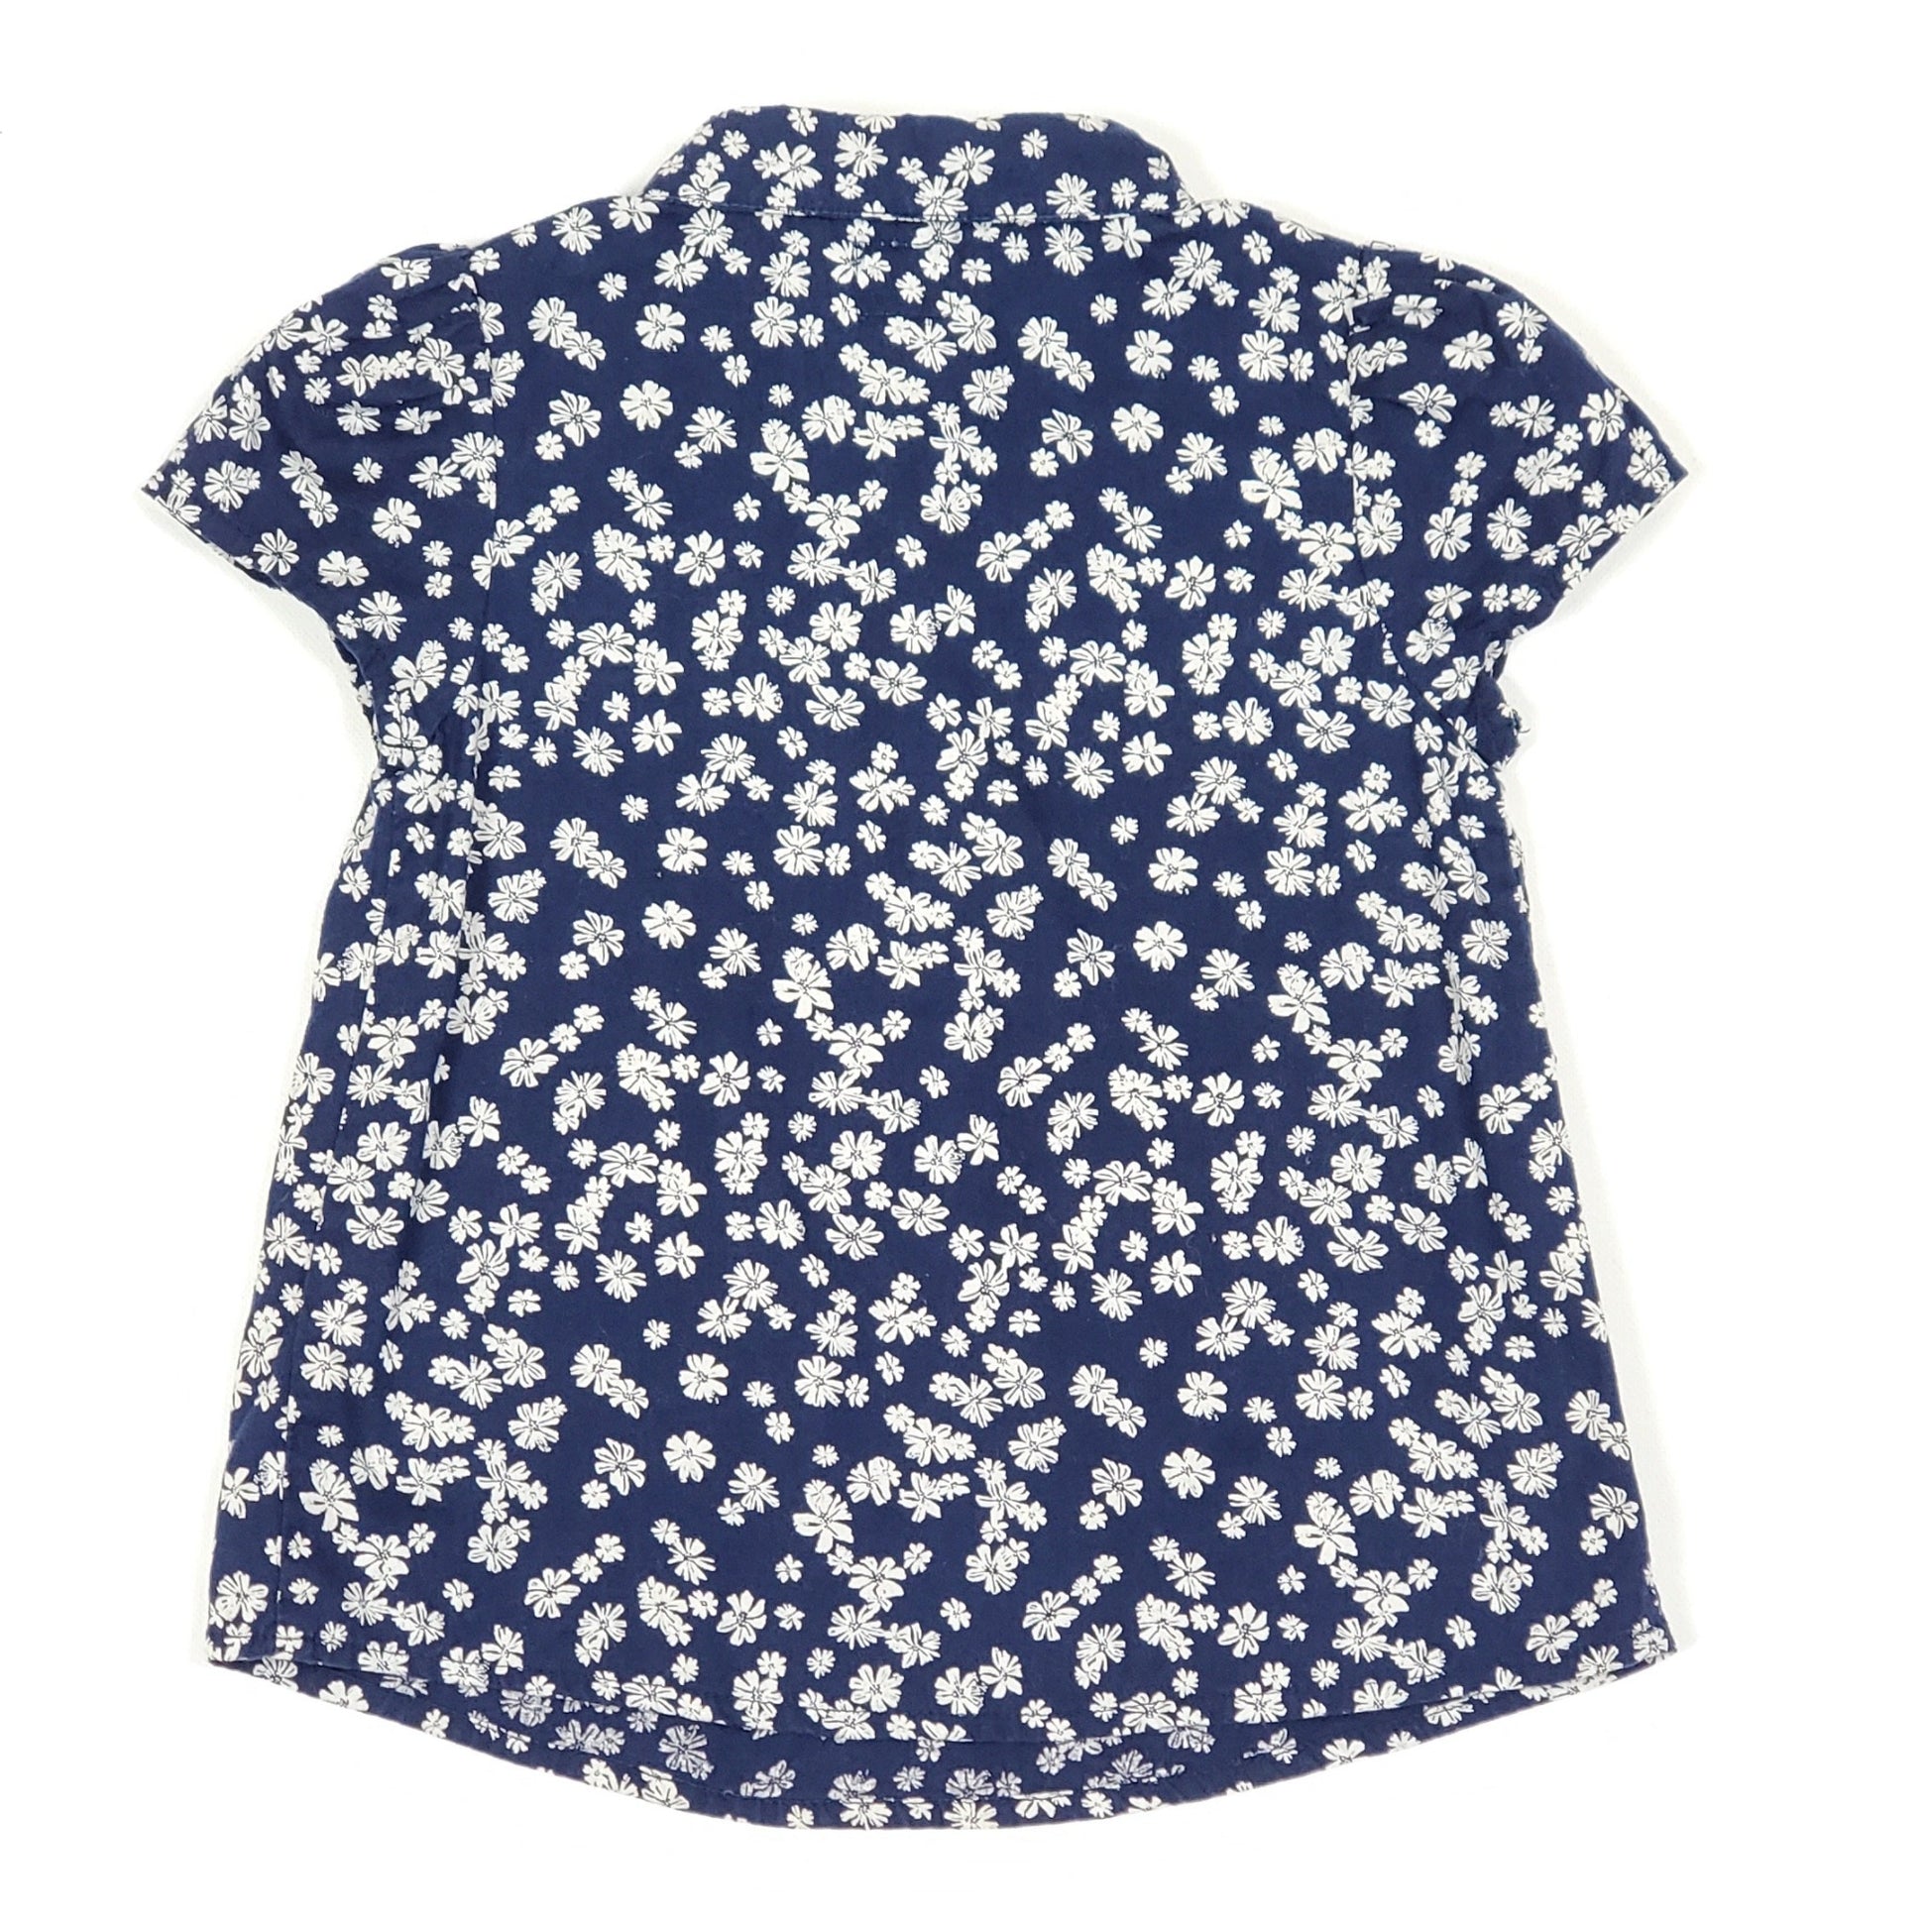 Baby Gap Blue White Floral Girls Top 2T Used, back